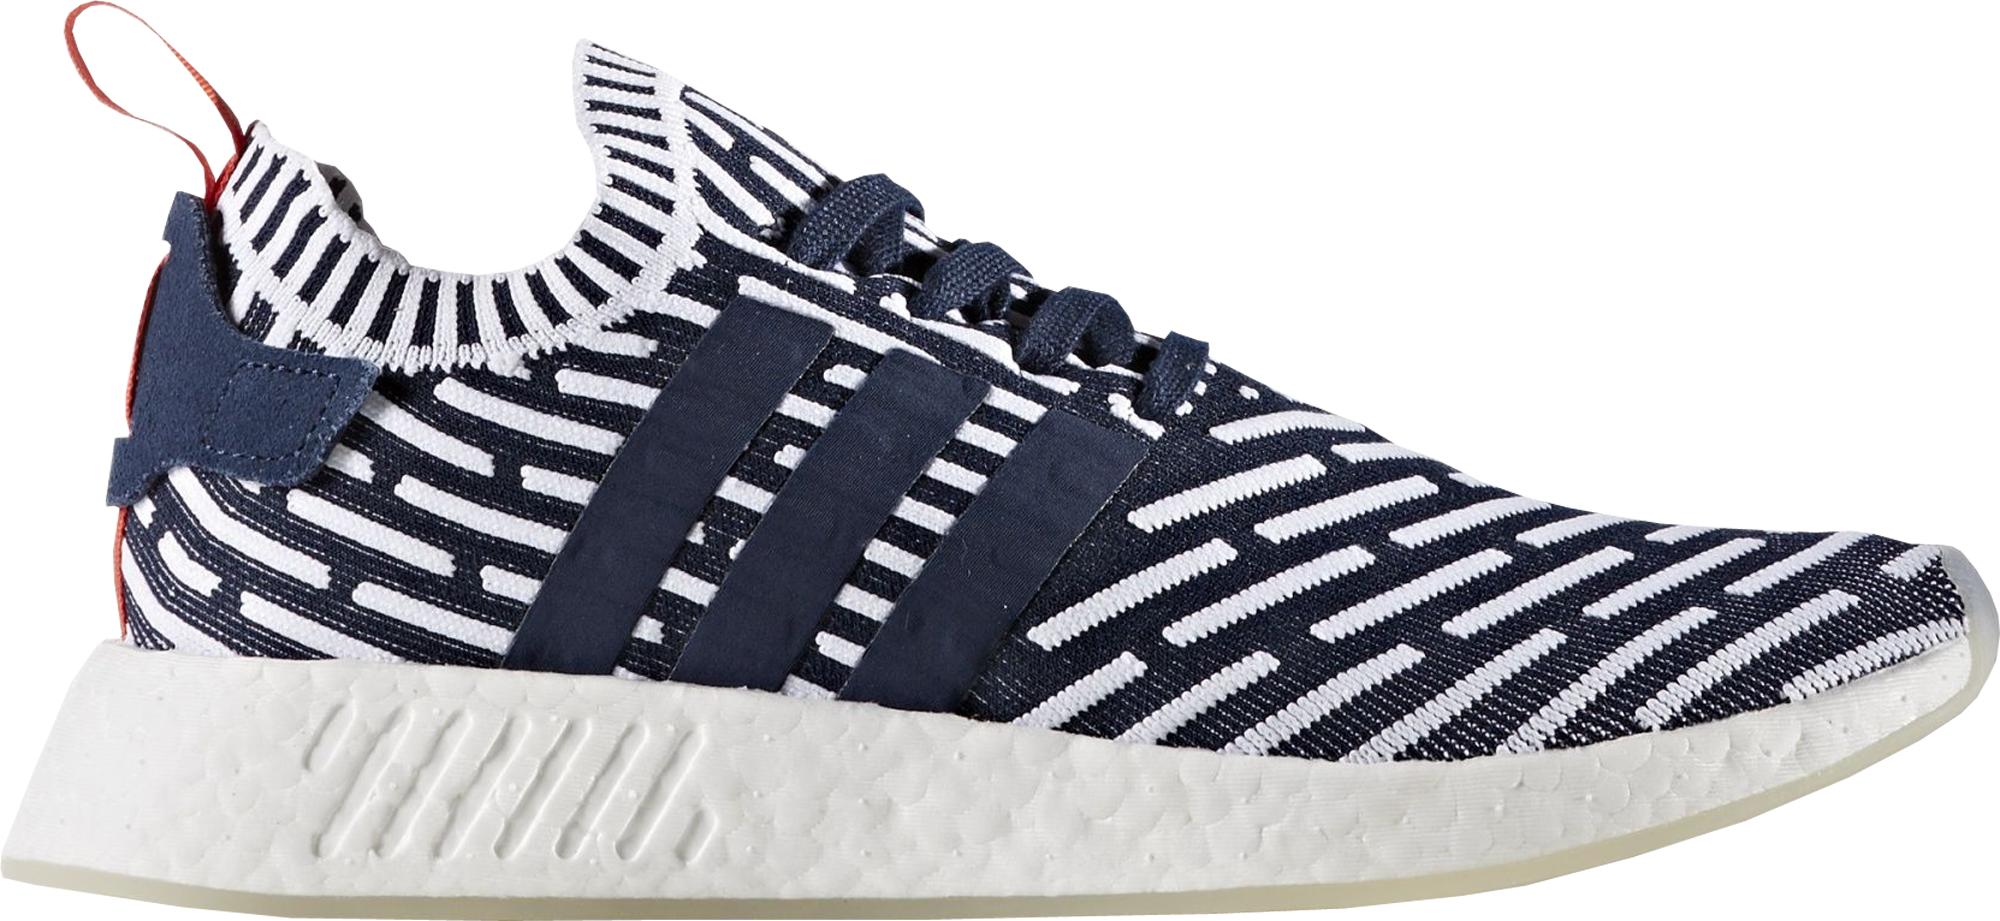 adidas NMD R2 Navy White Primeknit Two-Toned